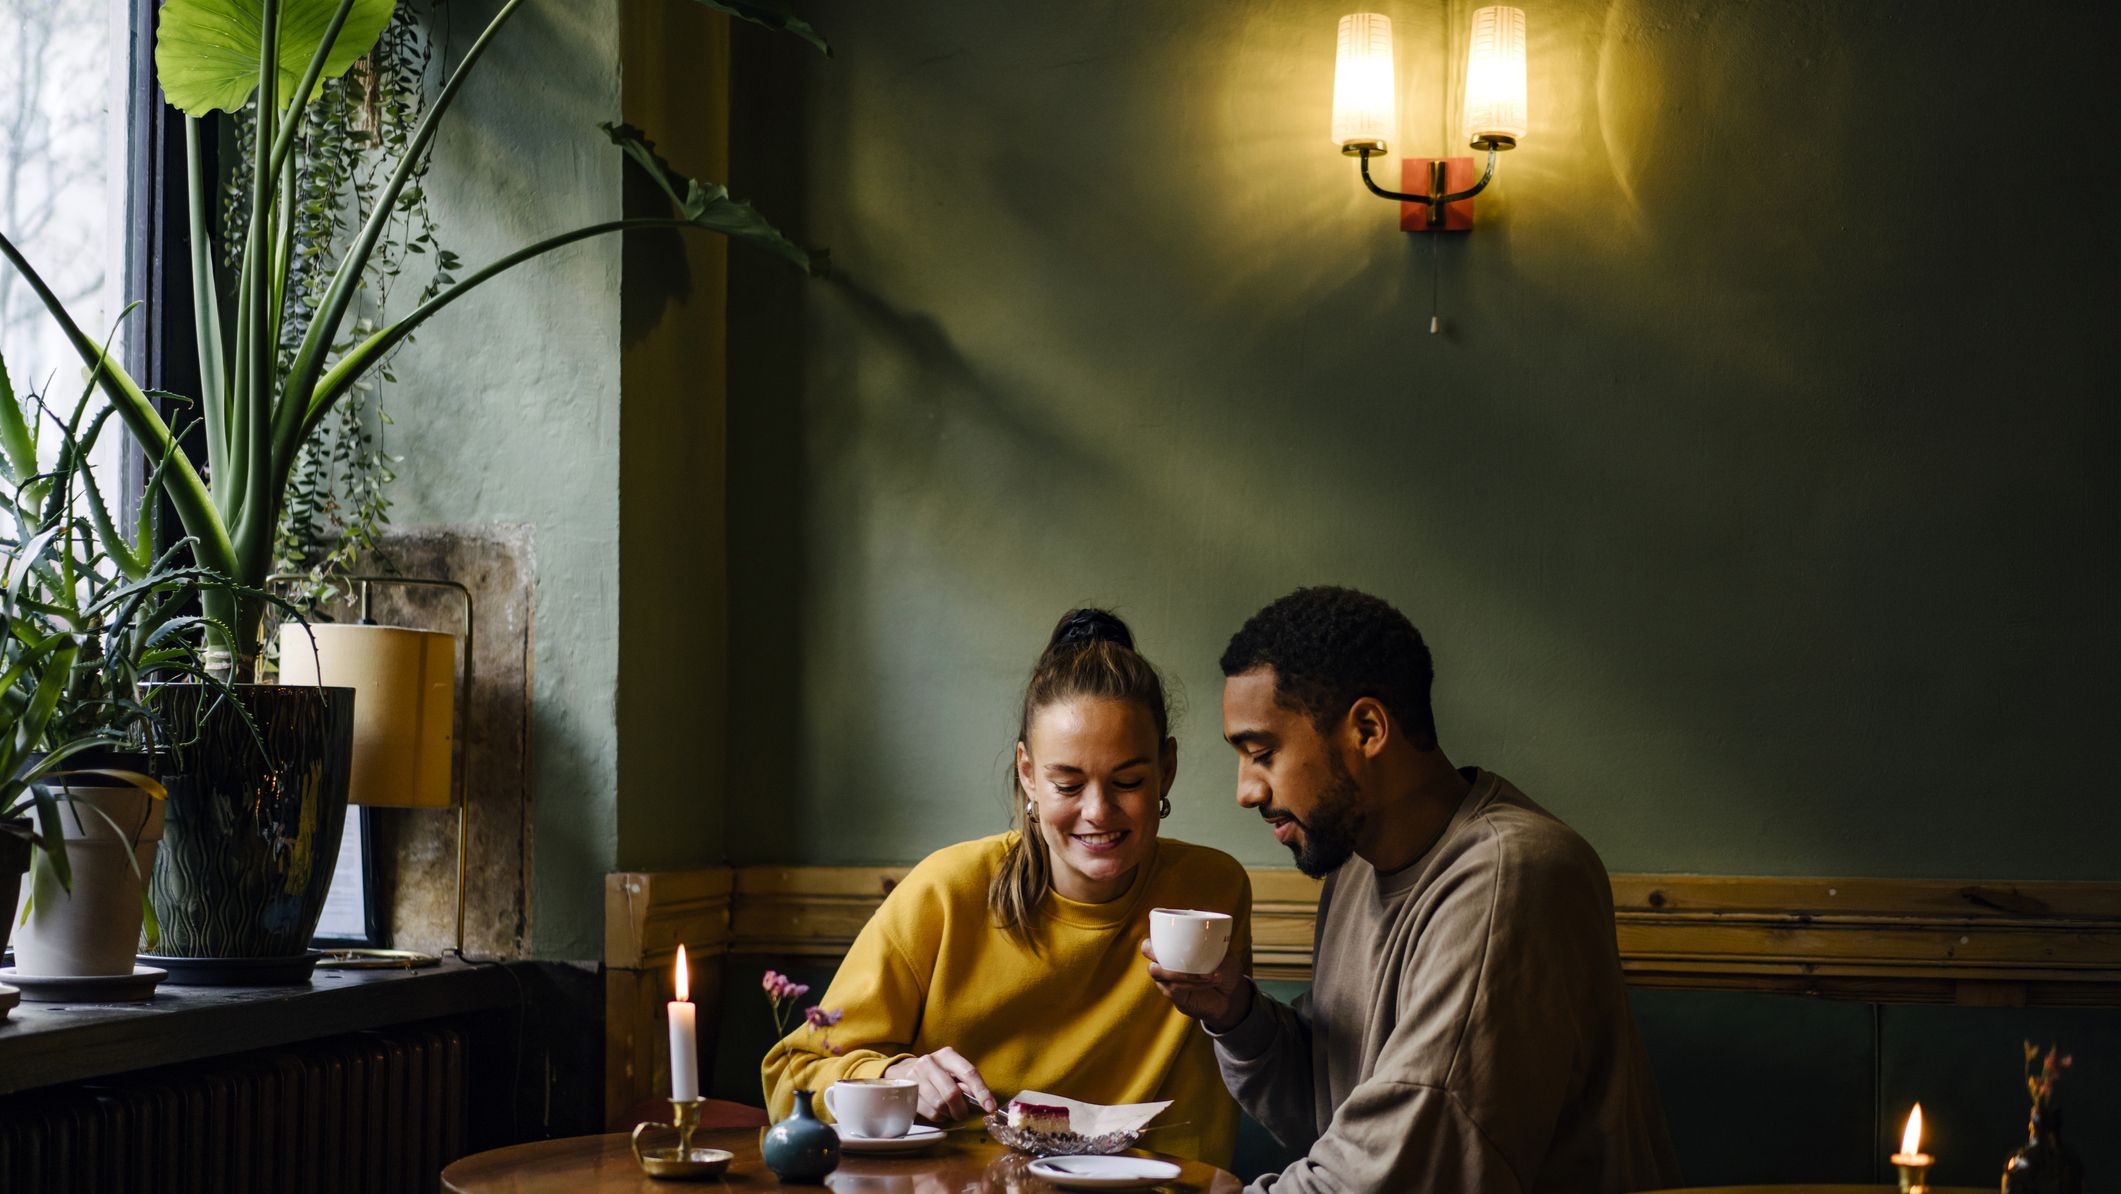 35 Winter Date Night Ideas That are Cozy, Creative and Romantic